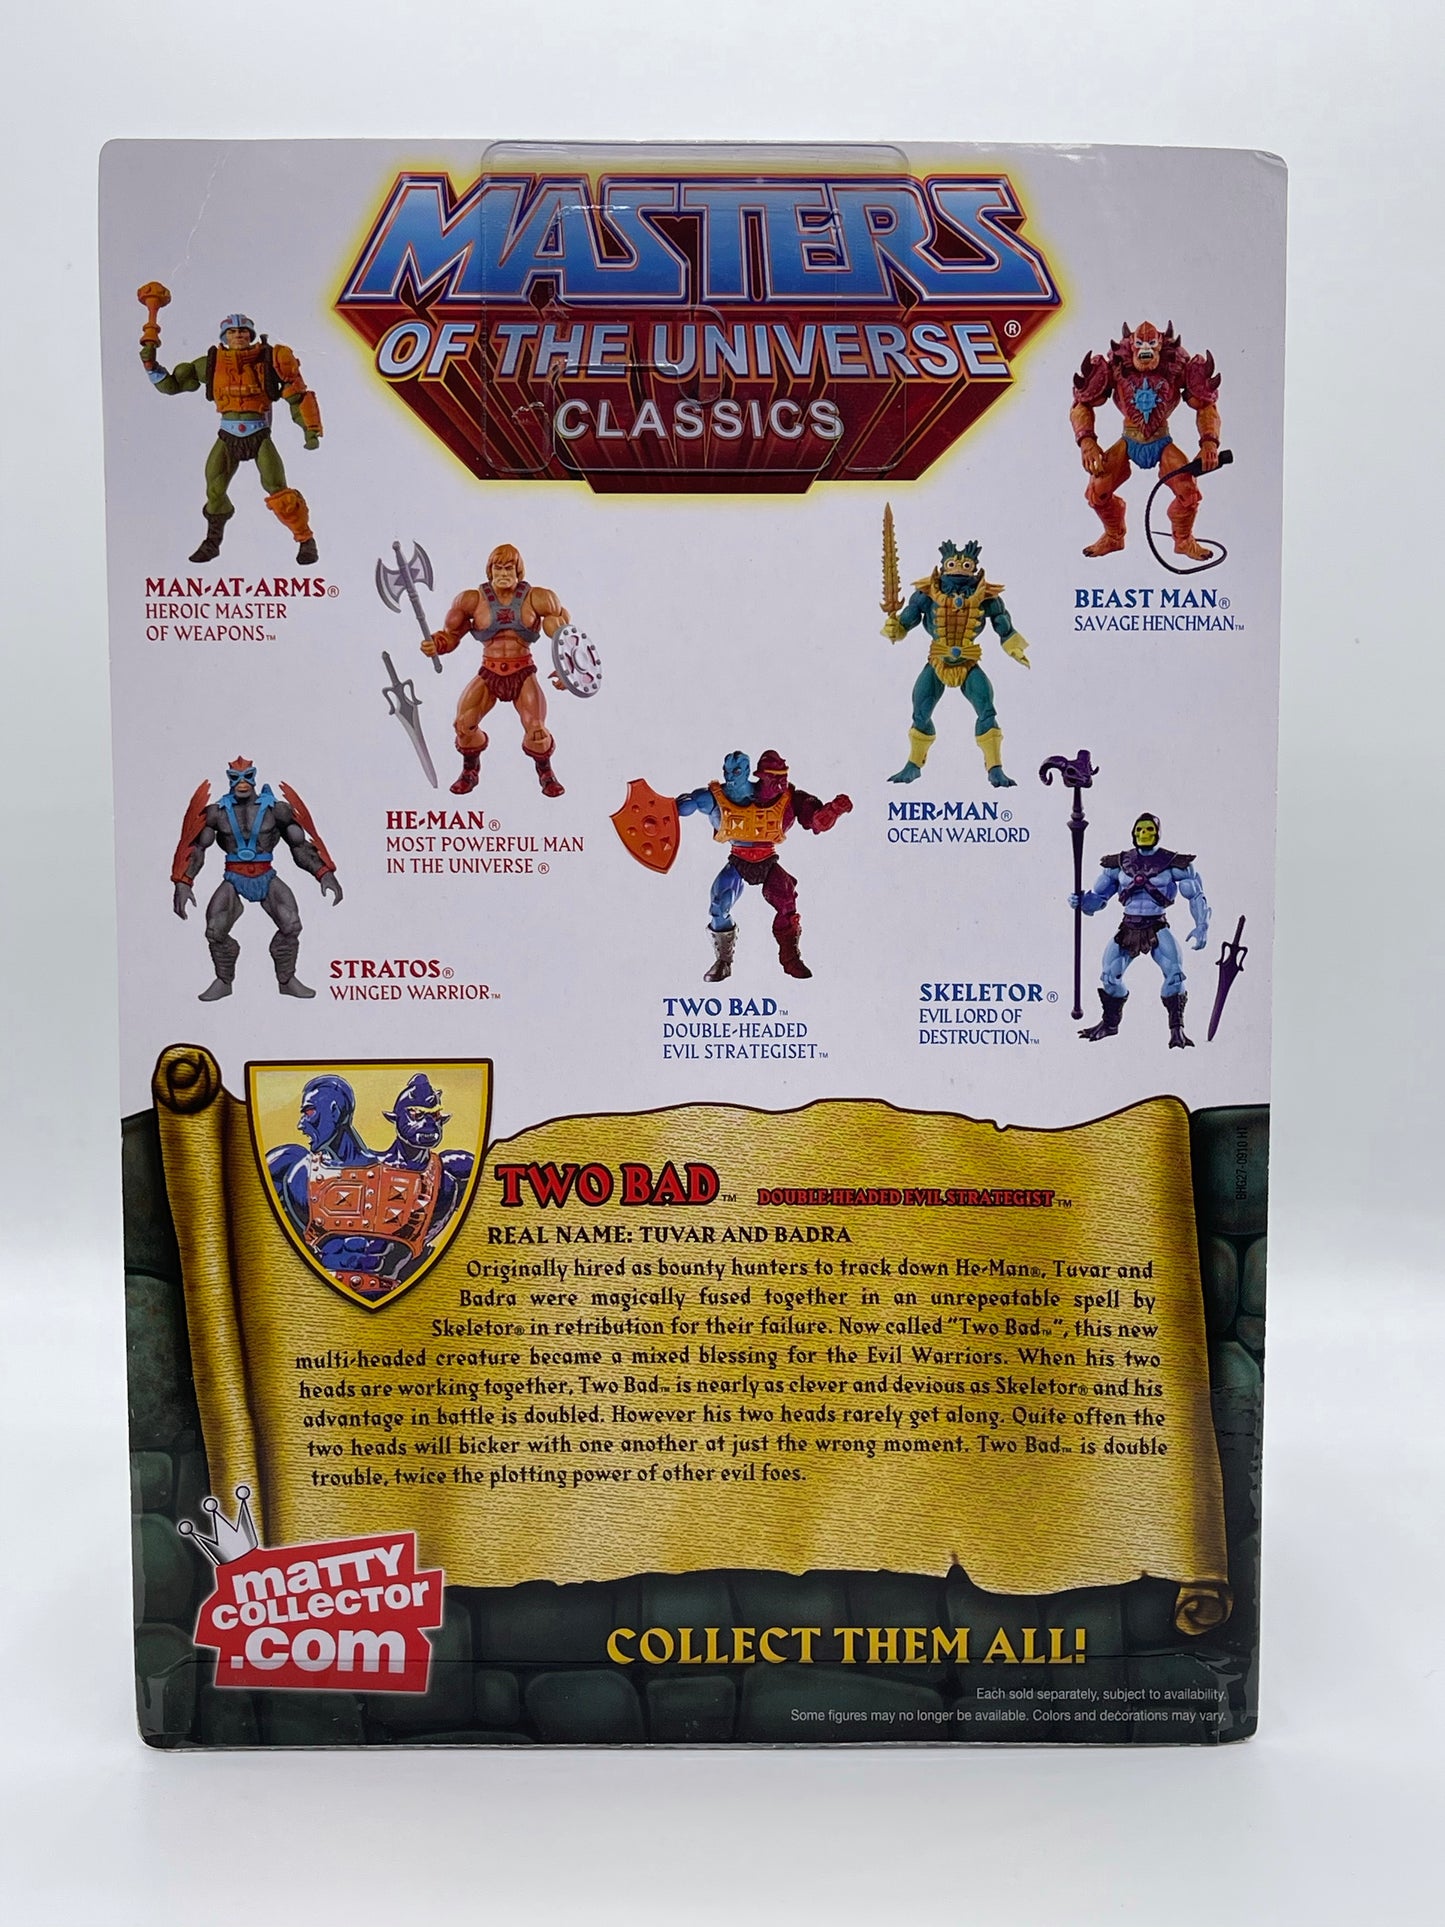 Masters of the Universe Classics Two Bad